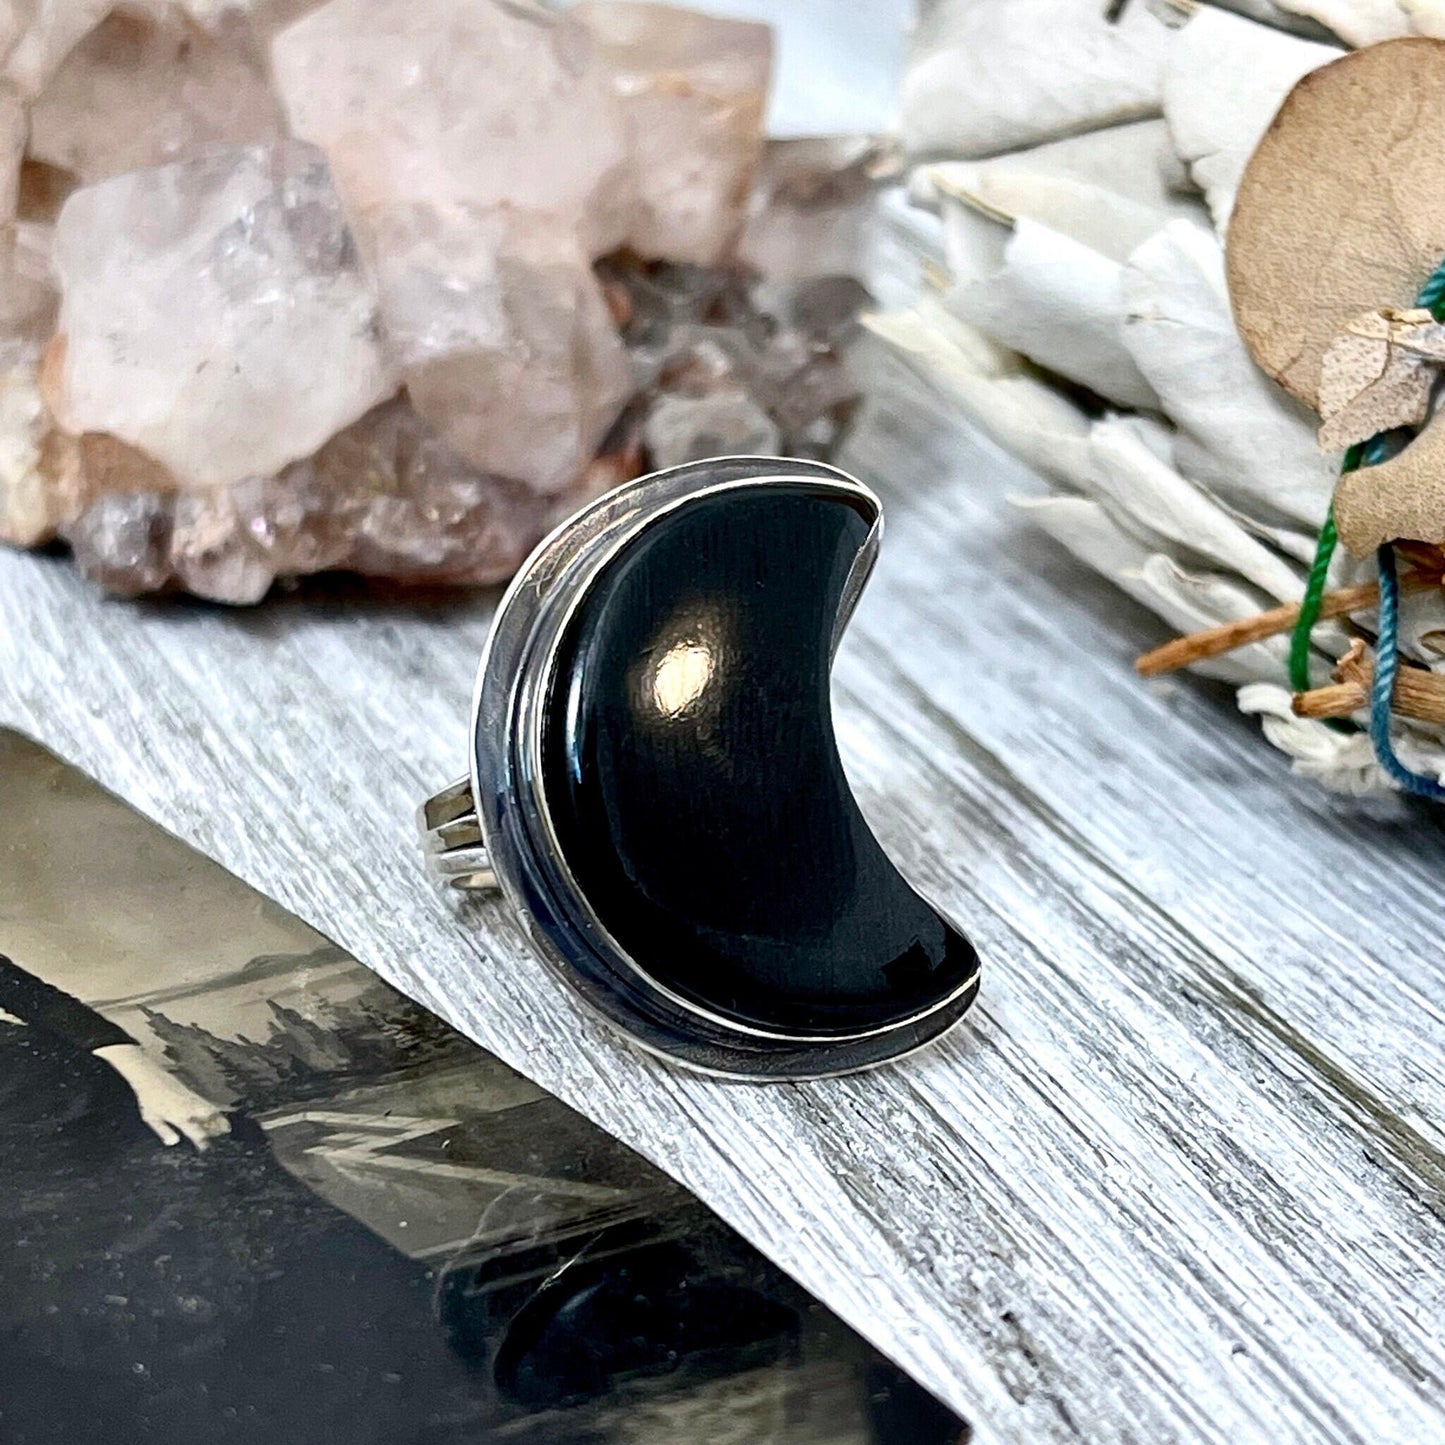 Crescent Moon Black Onyx Crystal Statement Ring in Sterling Silver- Designed by FOXLARK Collection Size 5 6 7 8 9 10 11